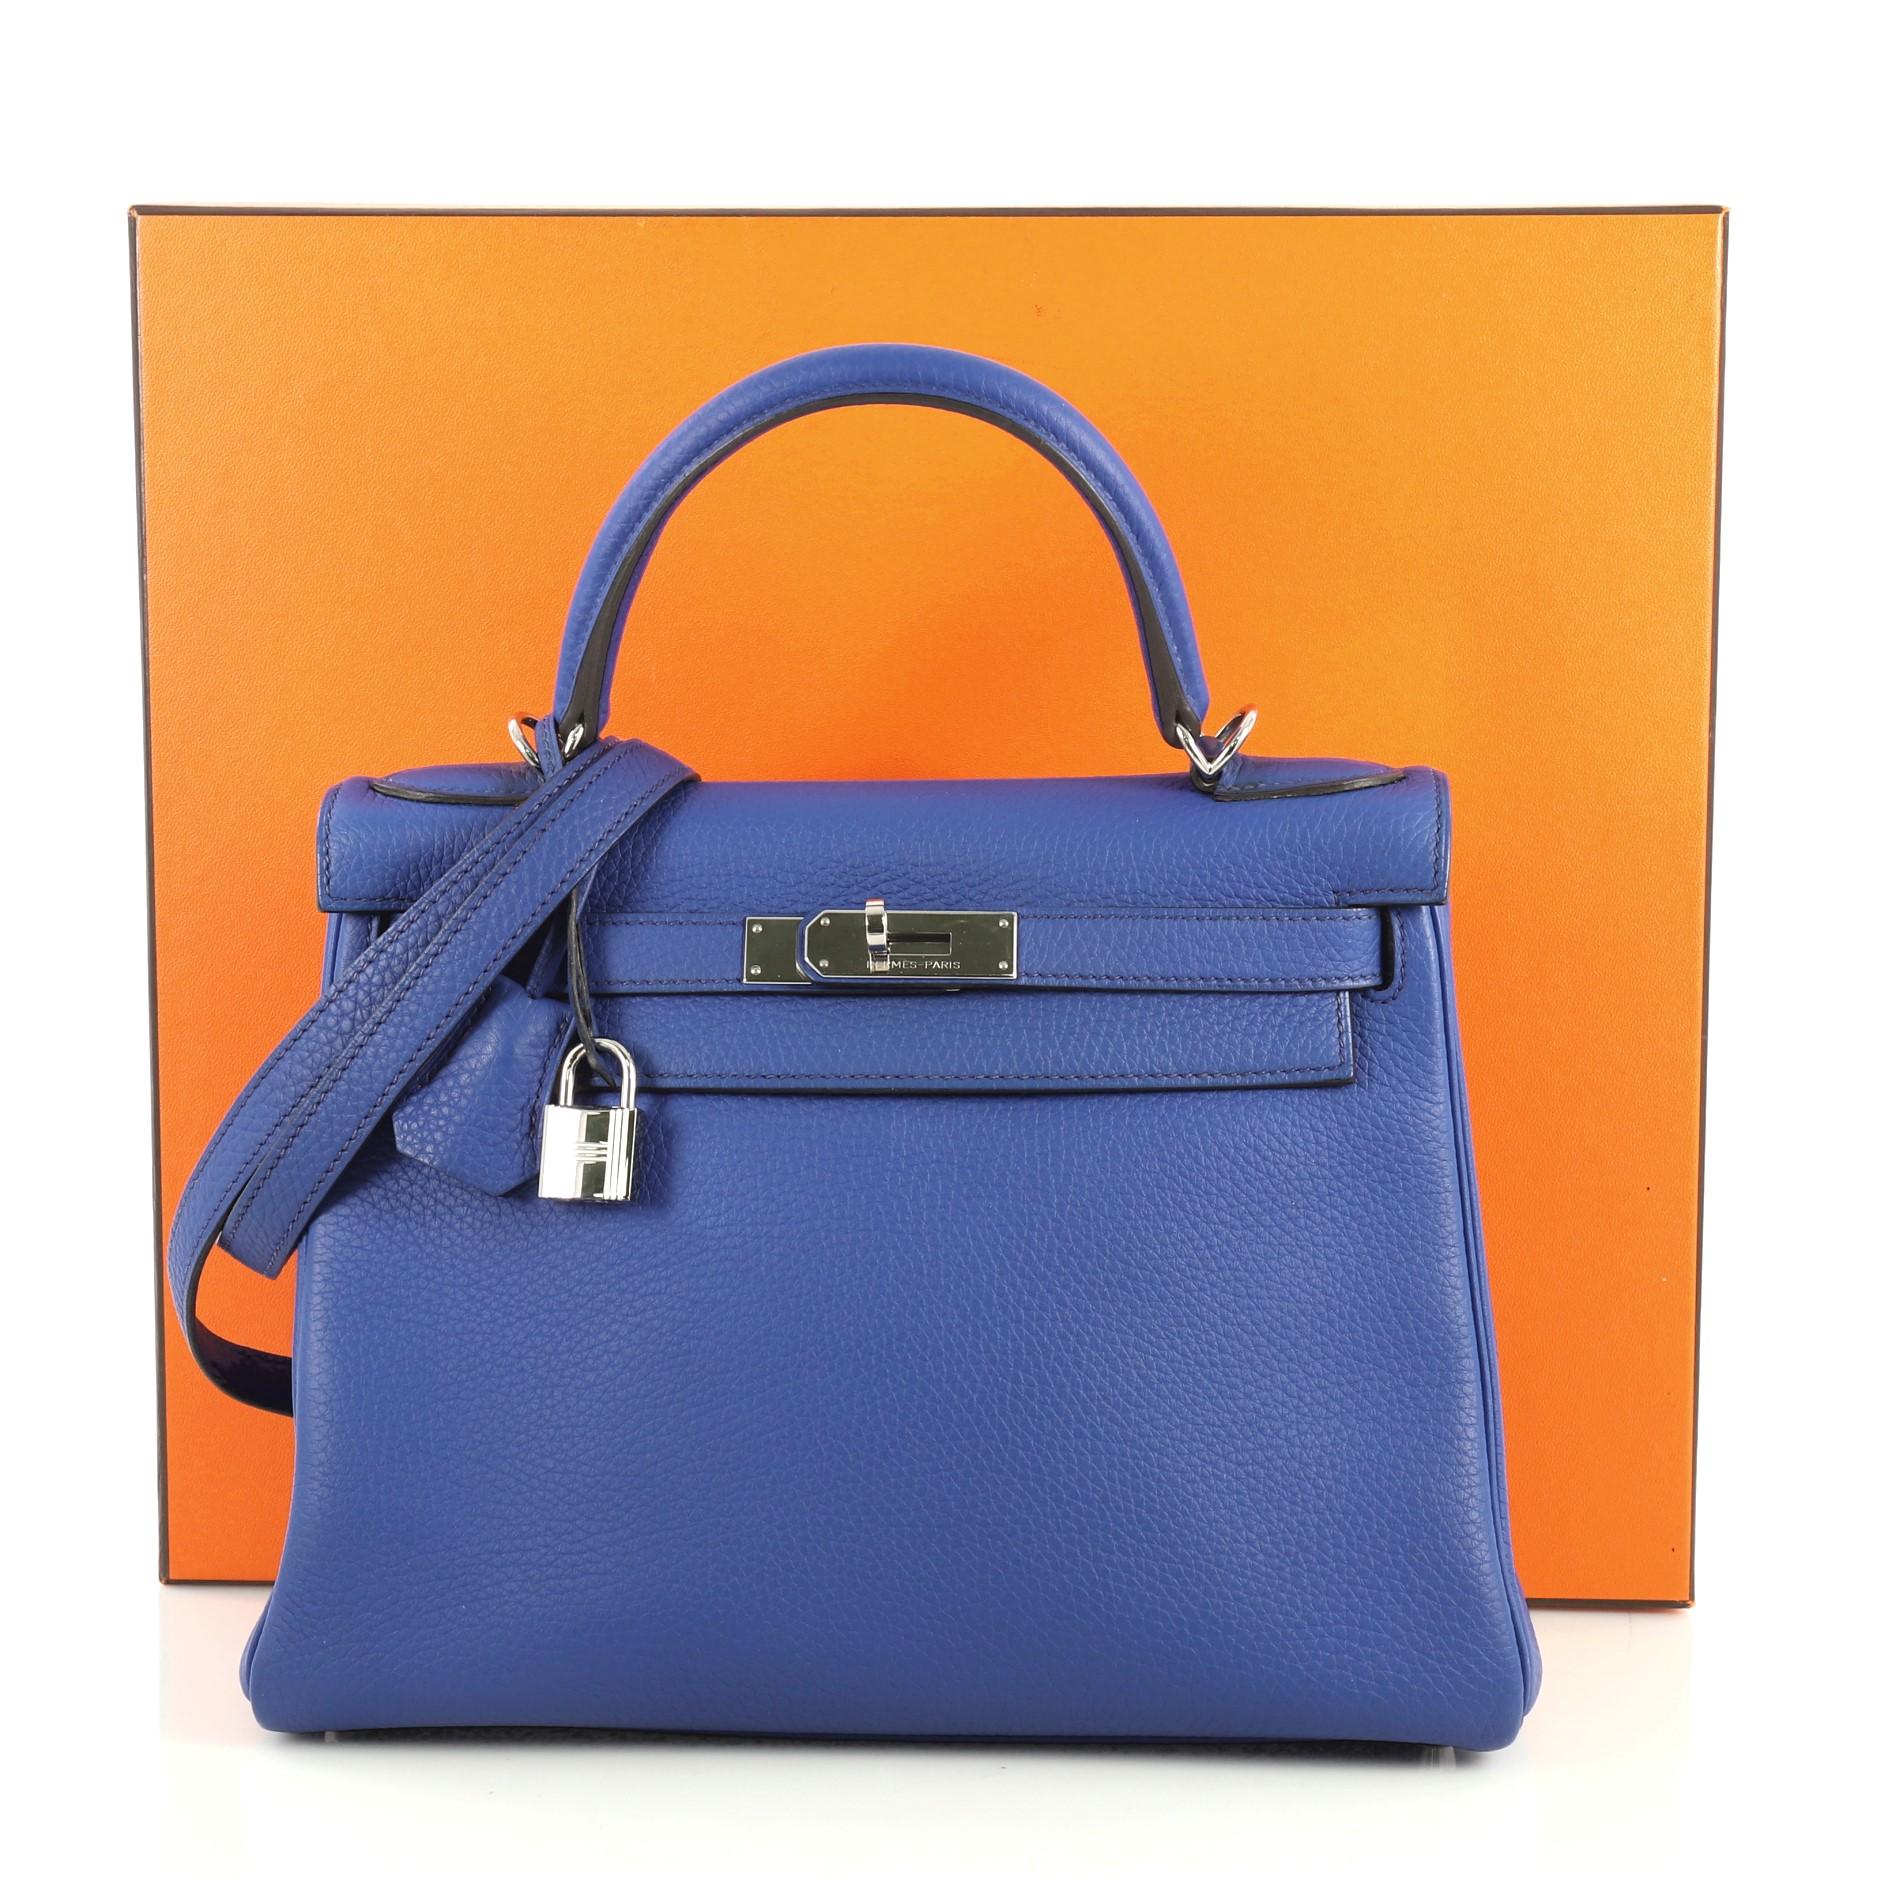 This Hermes Kelly Handbag Bleu Electrique Clemence with Palladium Hardware 28, crafted in Bleu Electrique blue Clemence leather, features a single rolled top handle, protective base studs, and palladium hardware. Its turn-lock closure opens to a